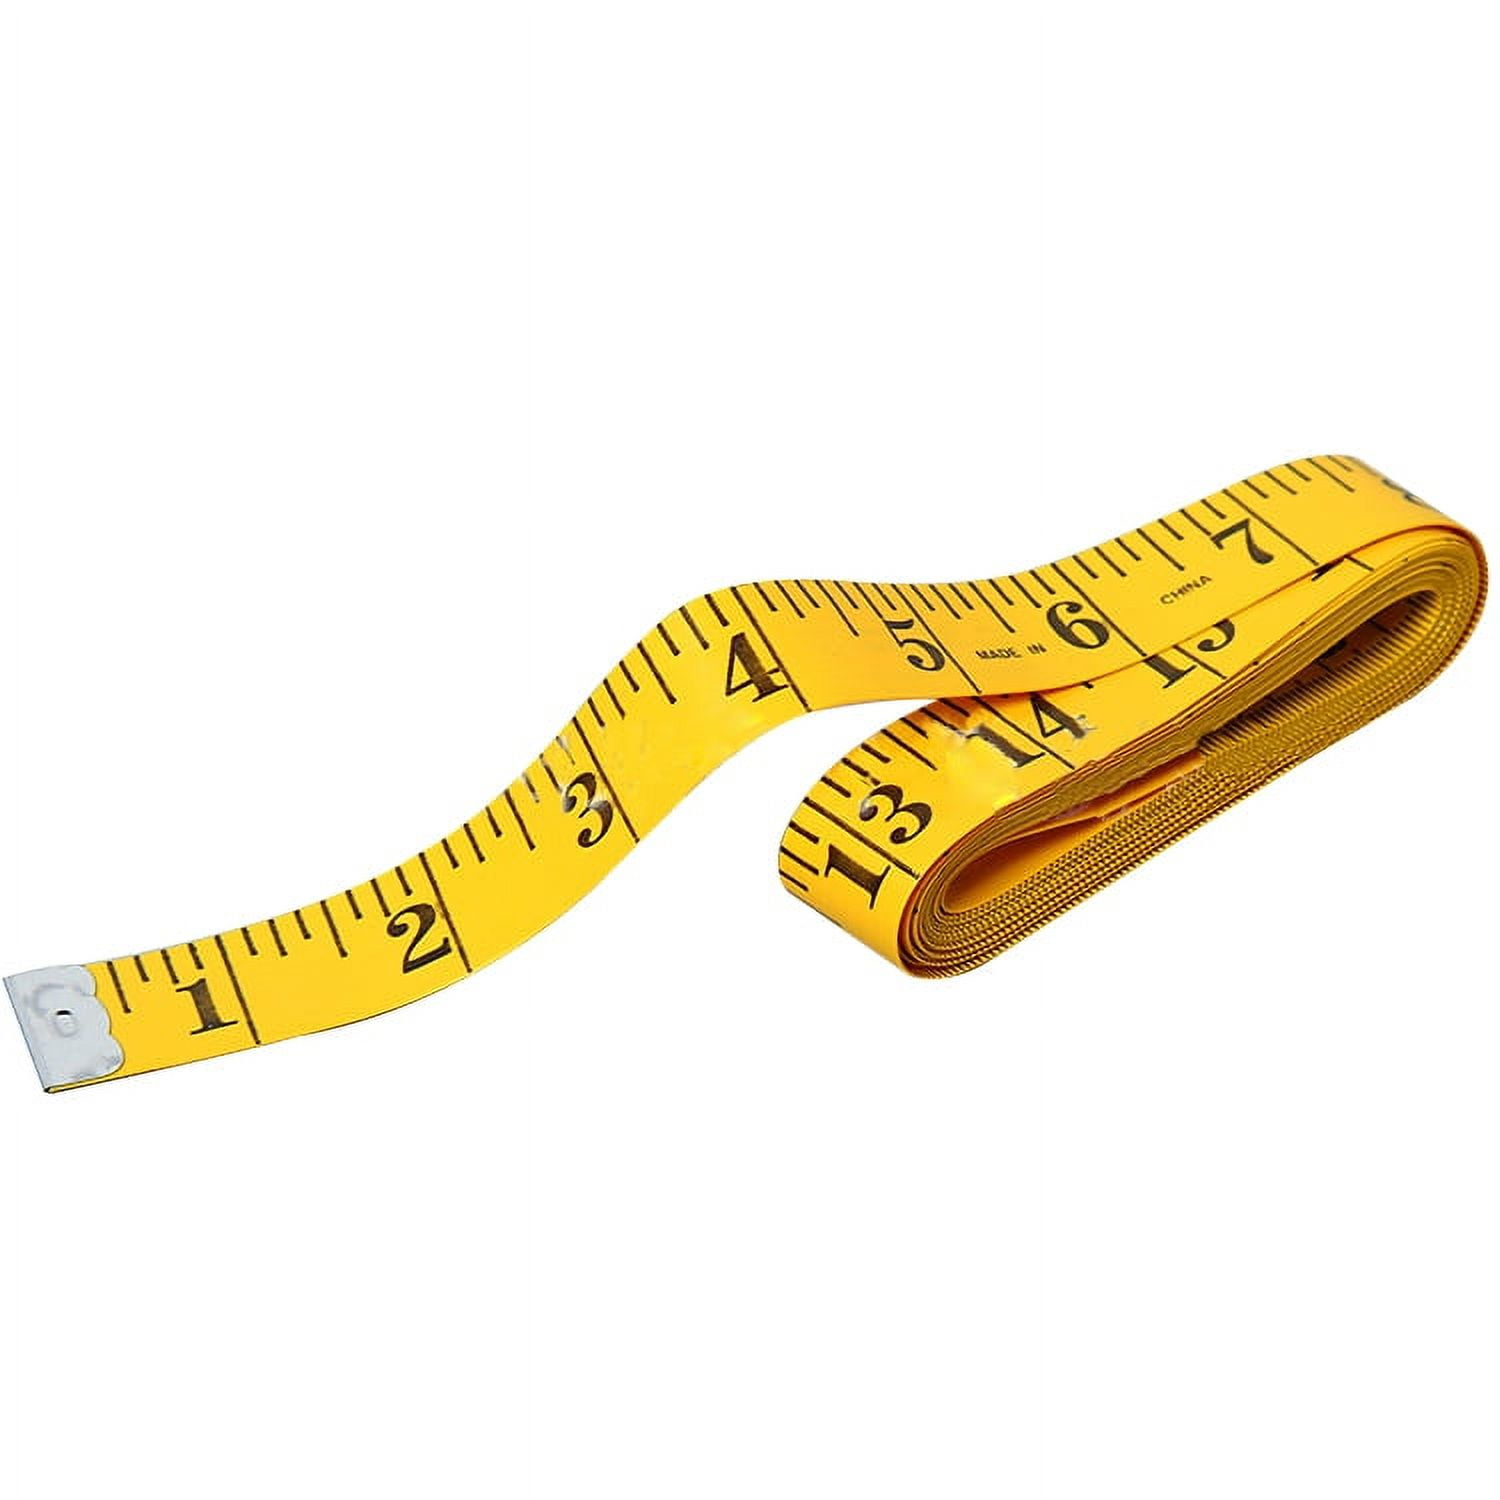 1pc 60inch 79inch Measuring Tape Fabric Small Tape Measure Retractable  Double Scales Rulers For Body Weight Loss, Check Out Today's Deals Now